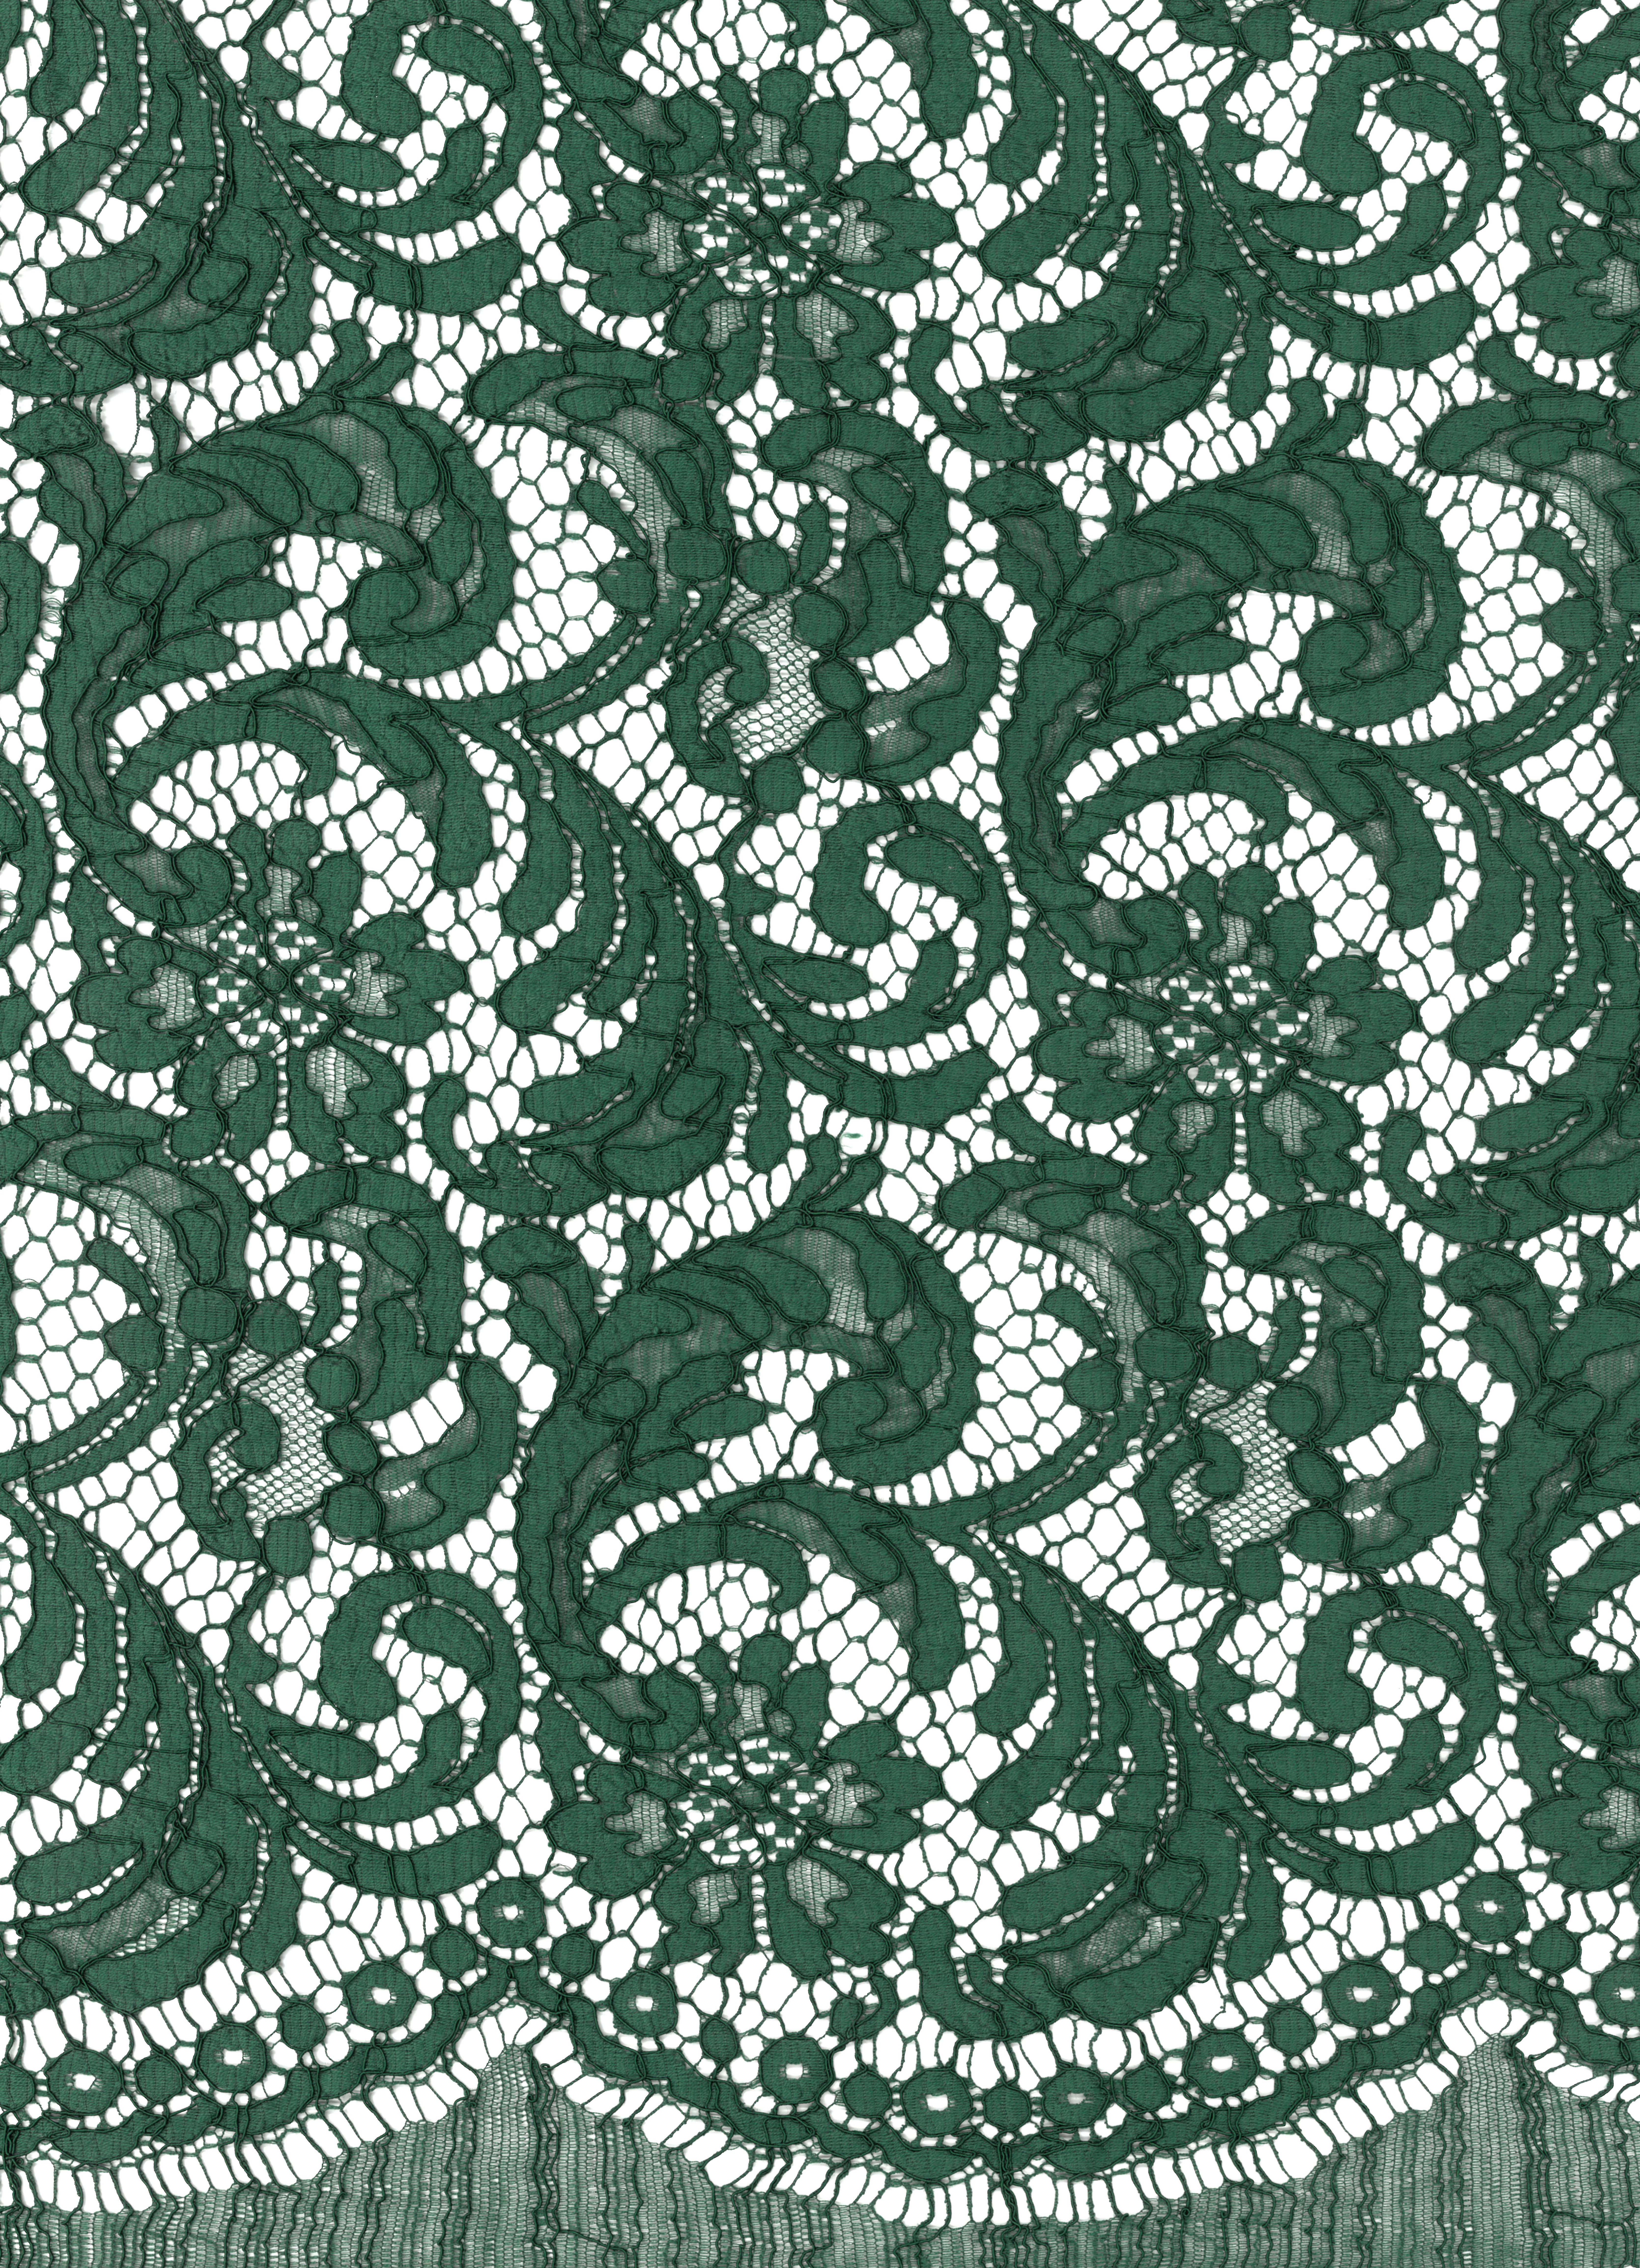 CORDED FRENCH LACE - EMERALD